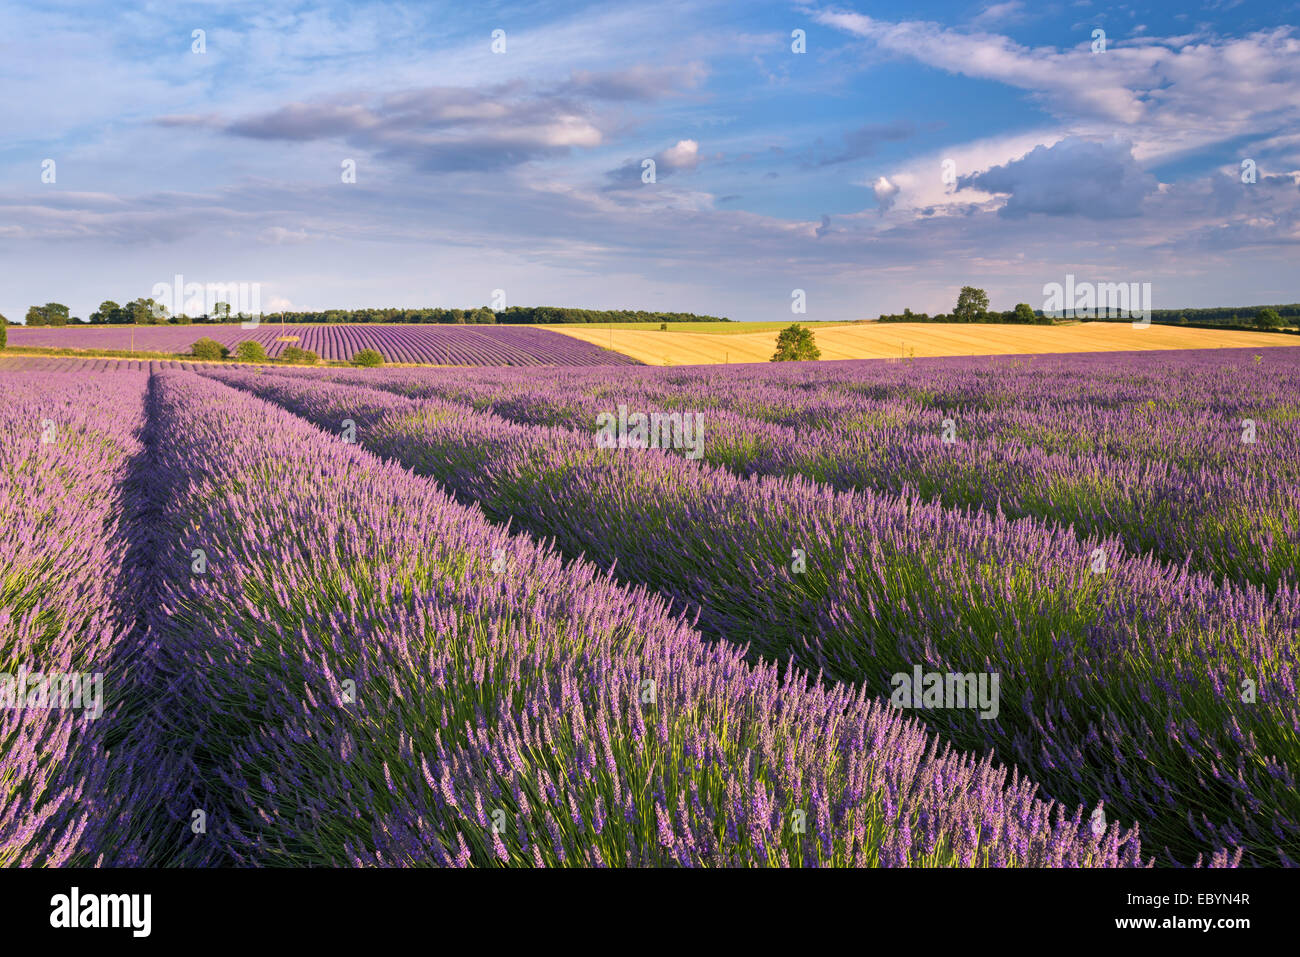 Lavender field in full bloom, Snowshill, Cotswolds, England. Summer (July) 2014. Stock Photo